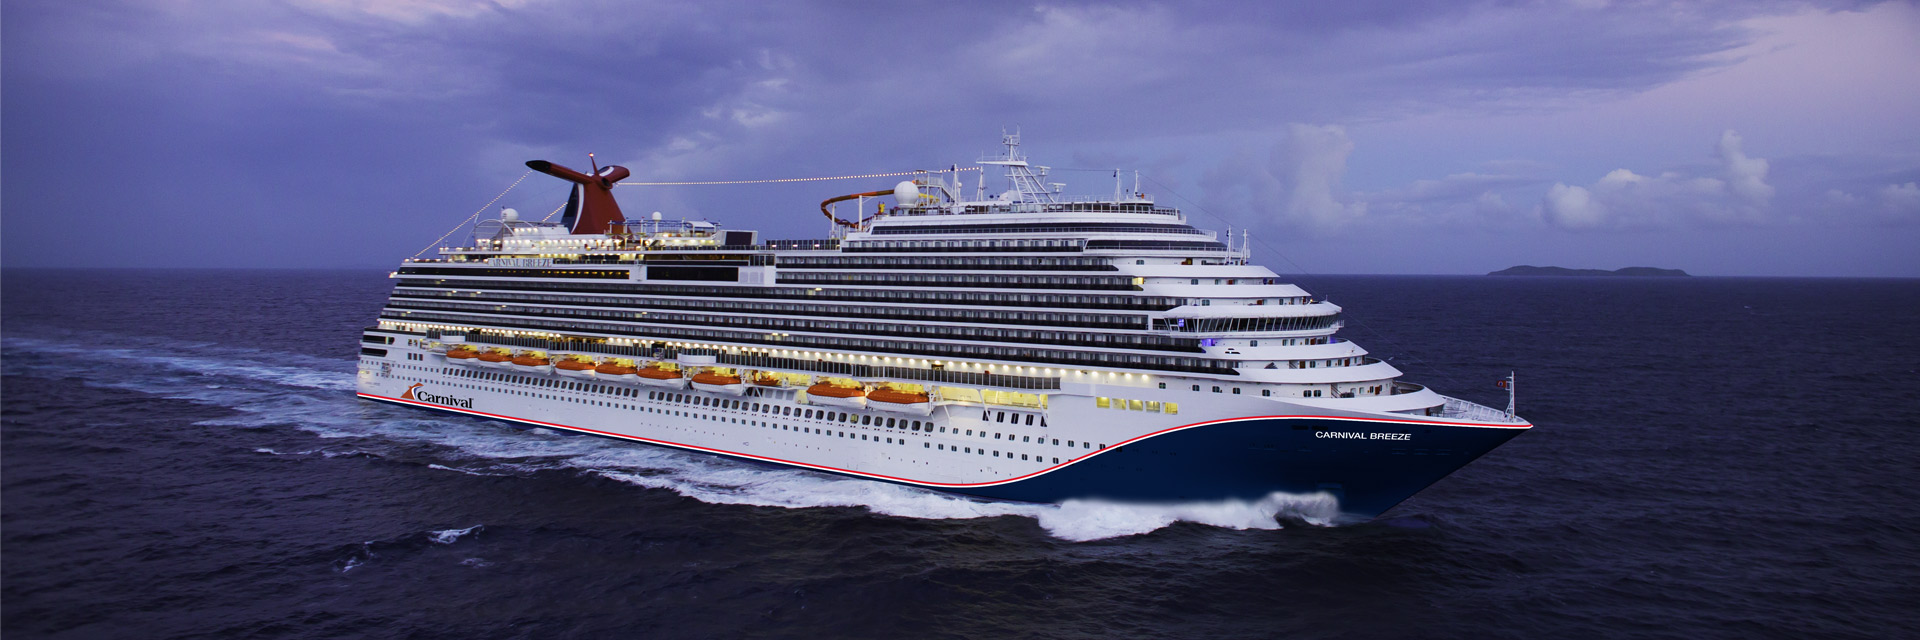 4 day carnival cruise from galveston